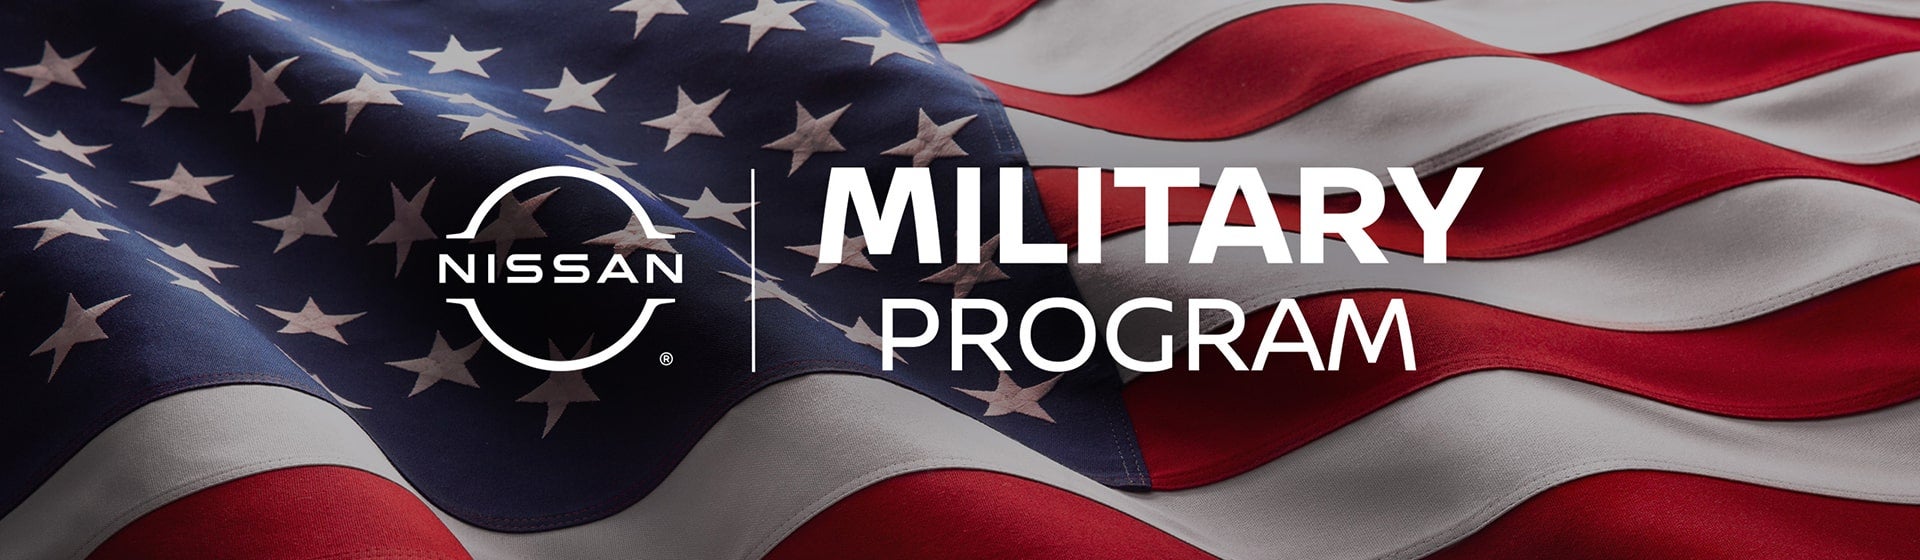 Nissan Military Discount | Benton Nissan of Oxford in Oxford AL